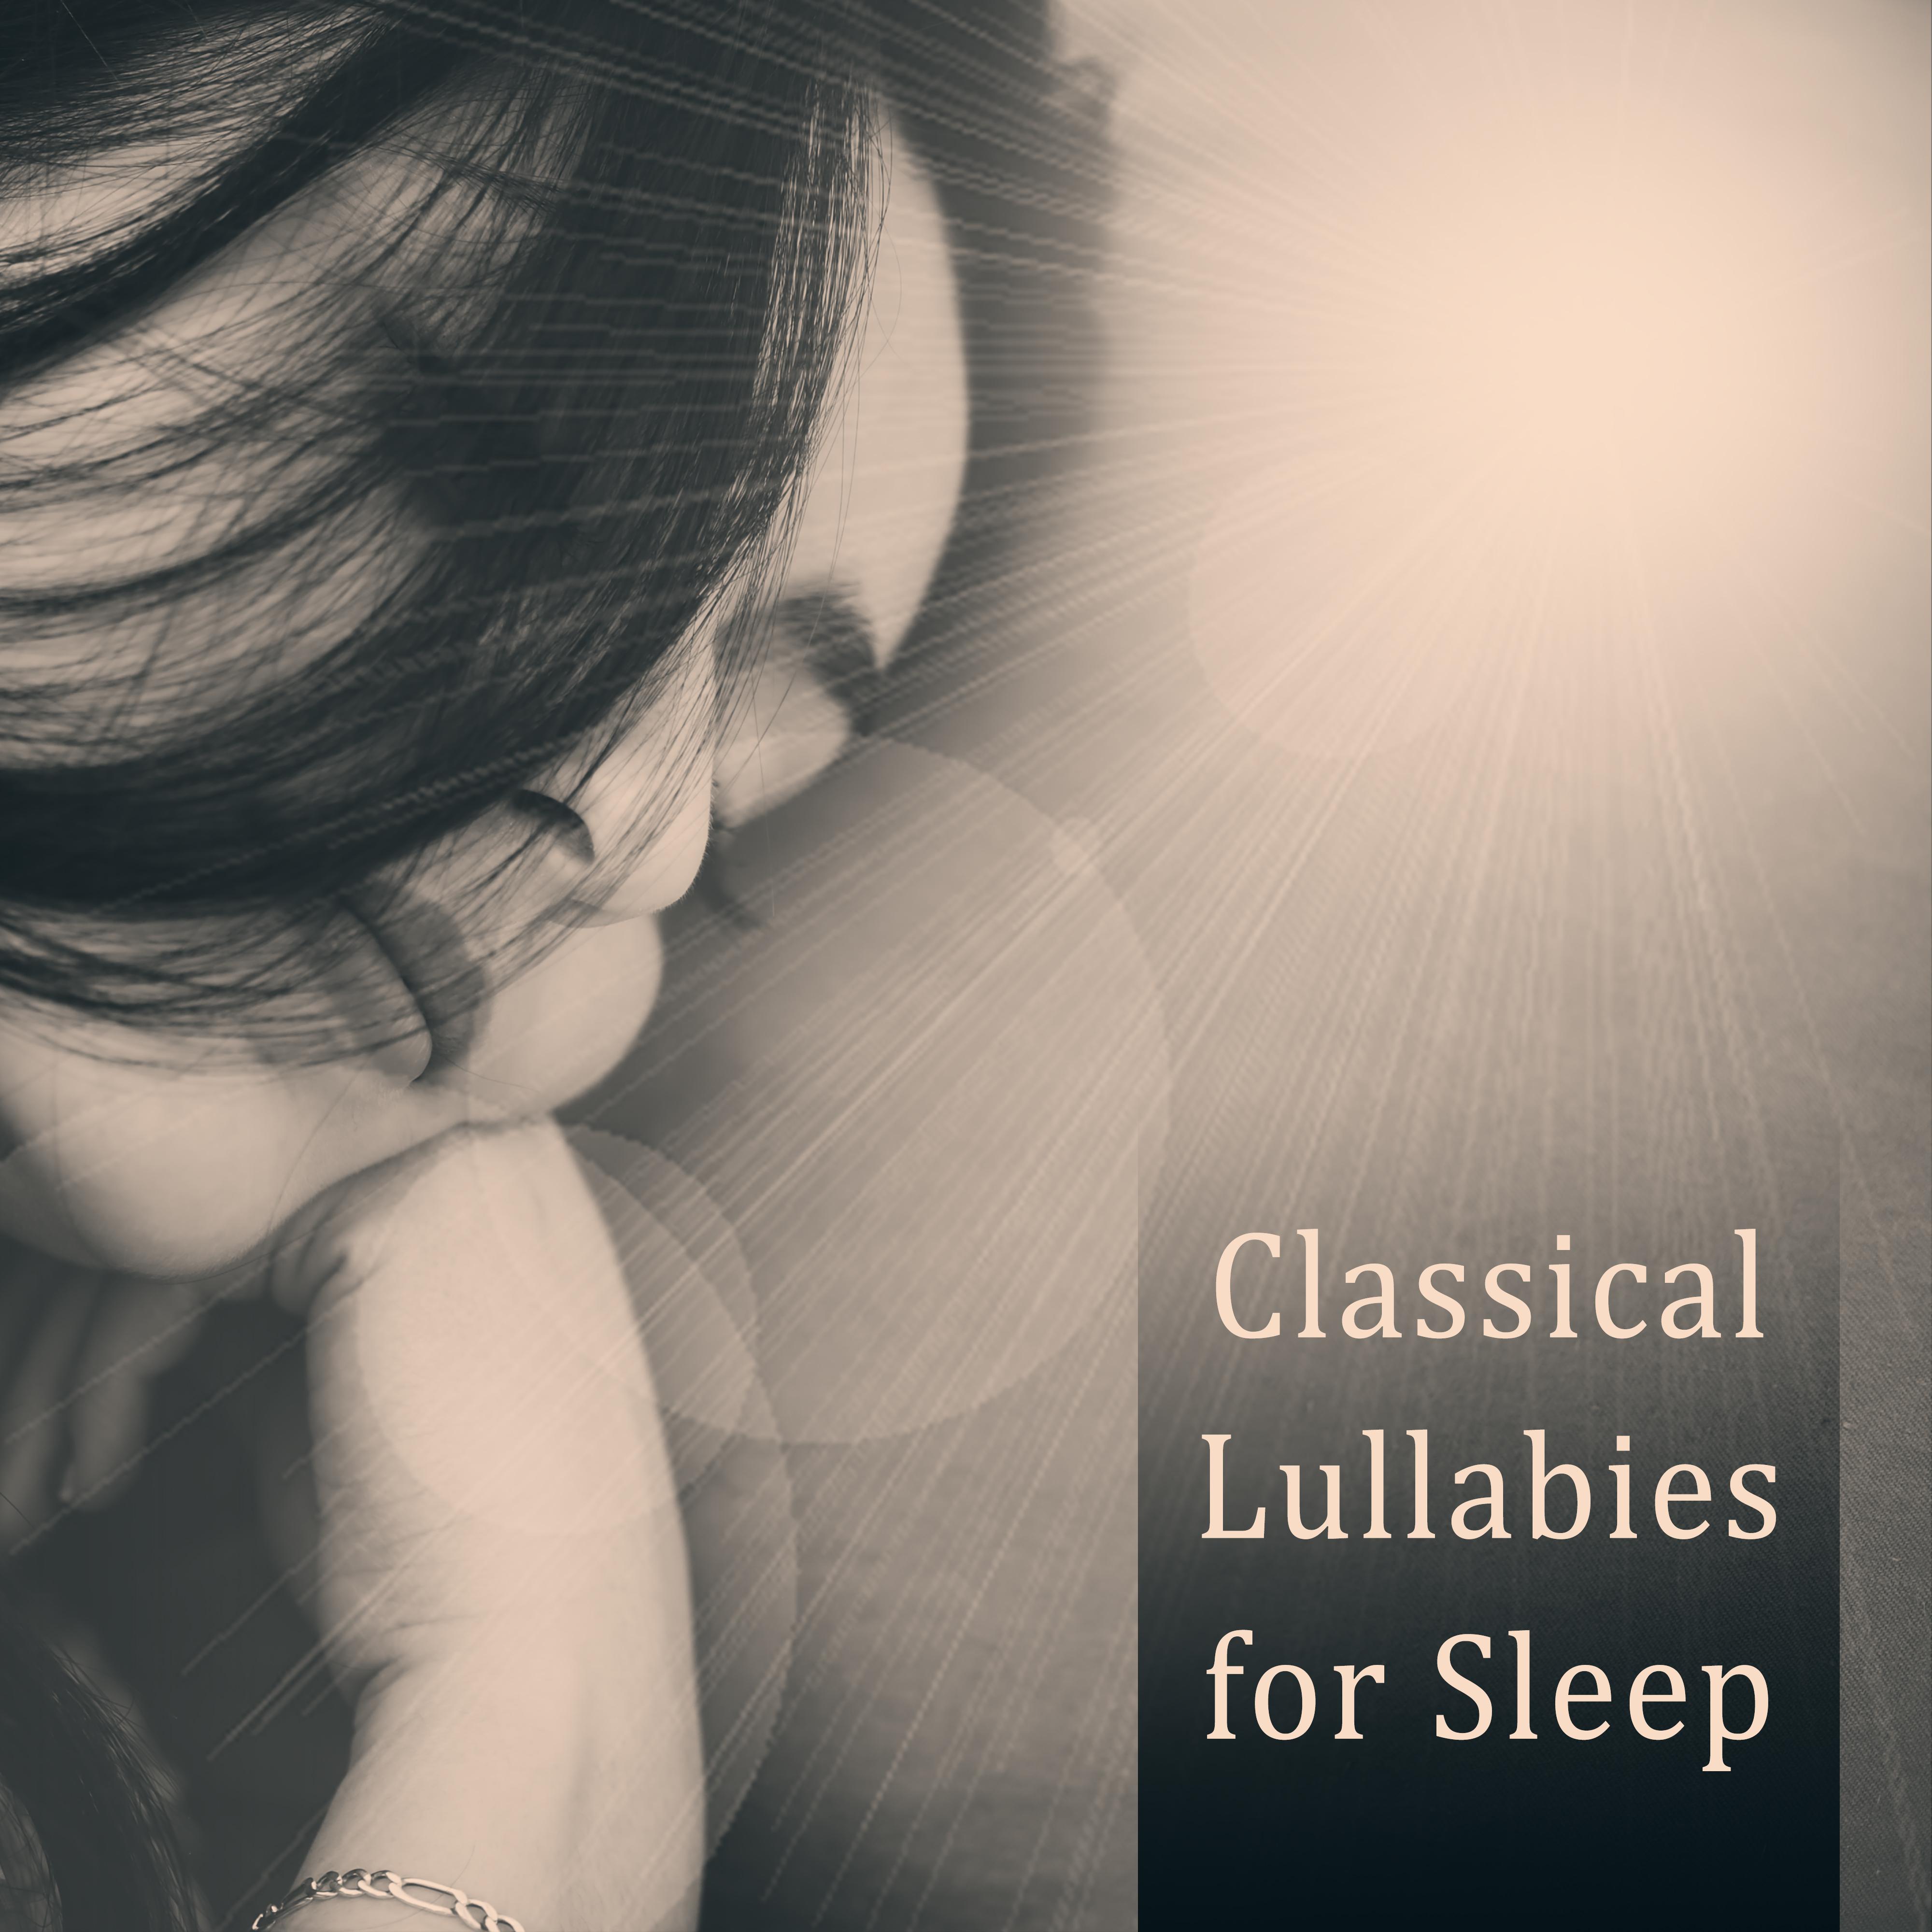 Classical Lullabies for Sleep – Relaxing Music, Ambient Instrumental Music